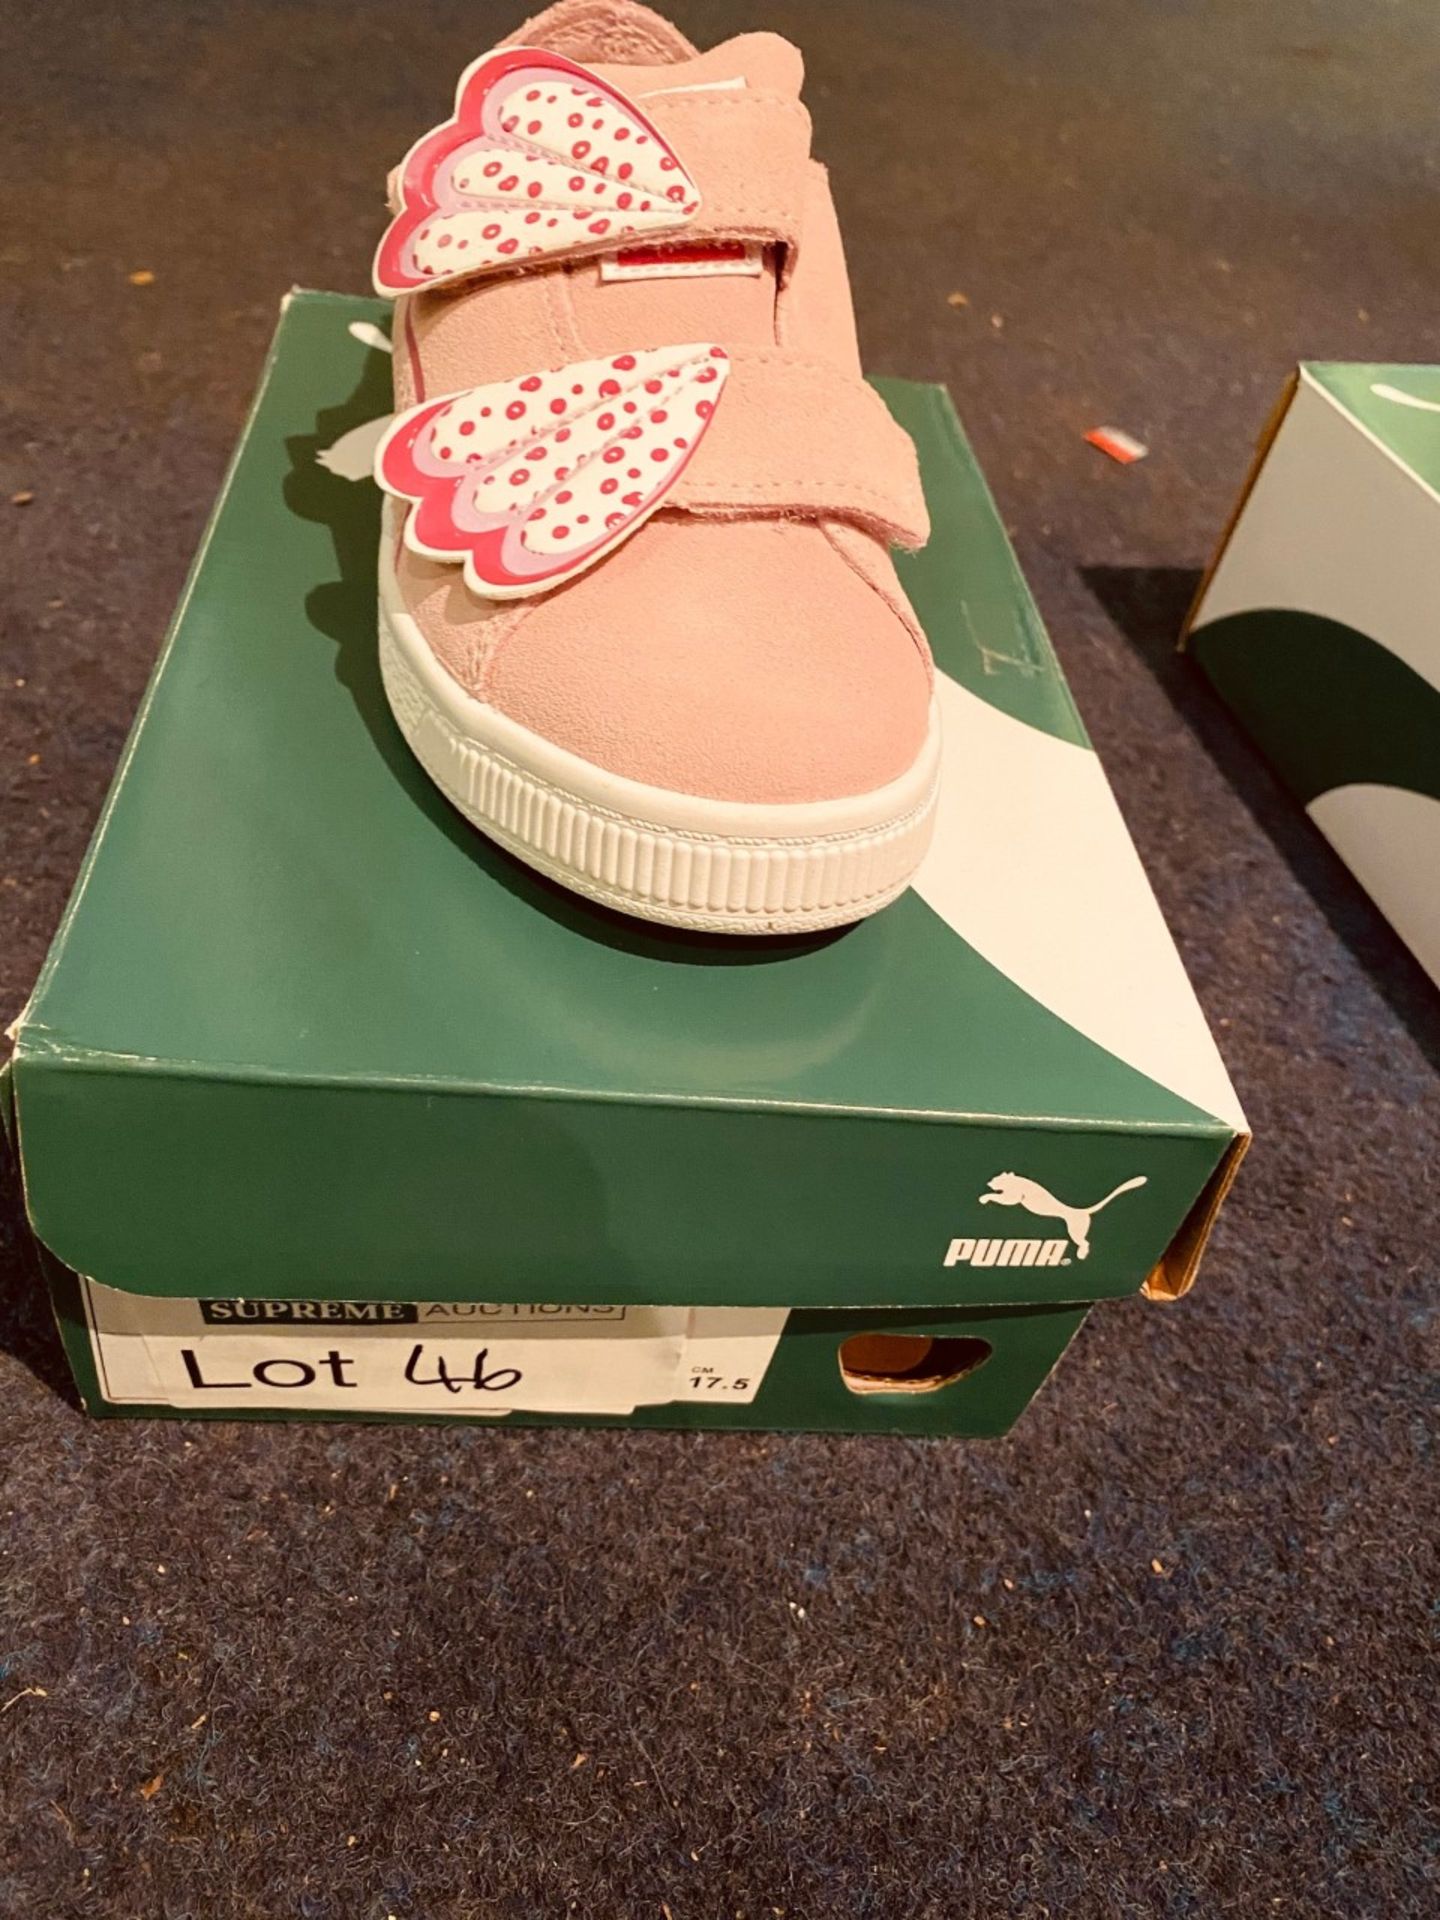 NEW AND BOXED PUMA PINK I-11 - Image 2 of 2